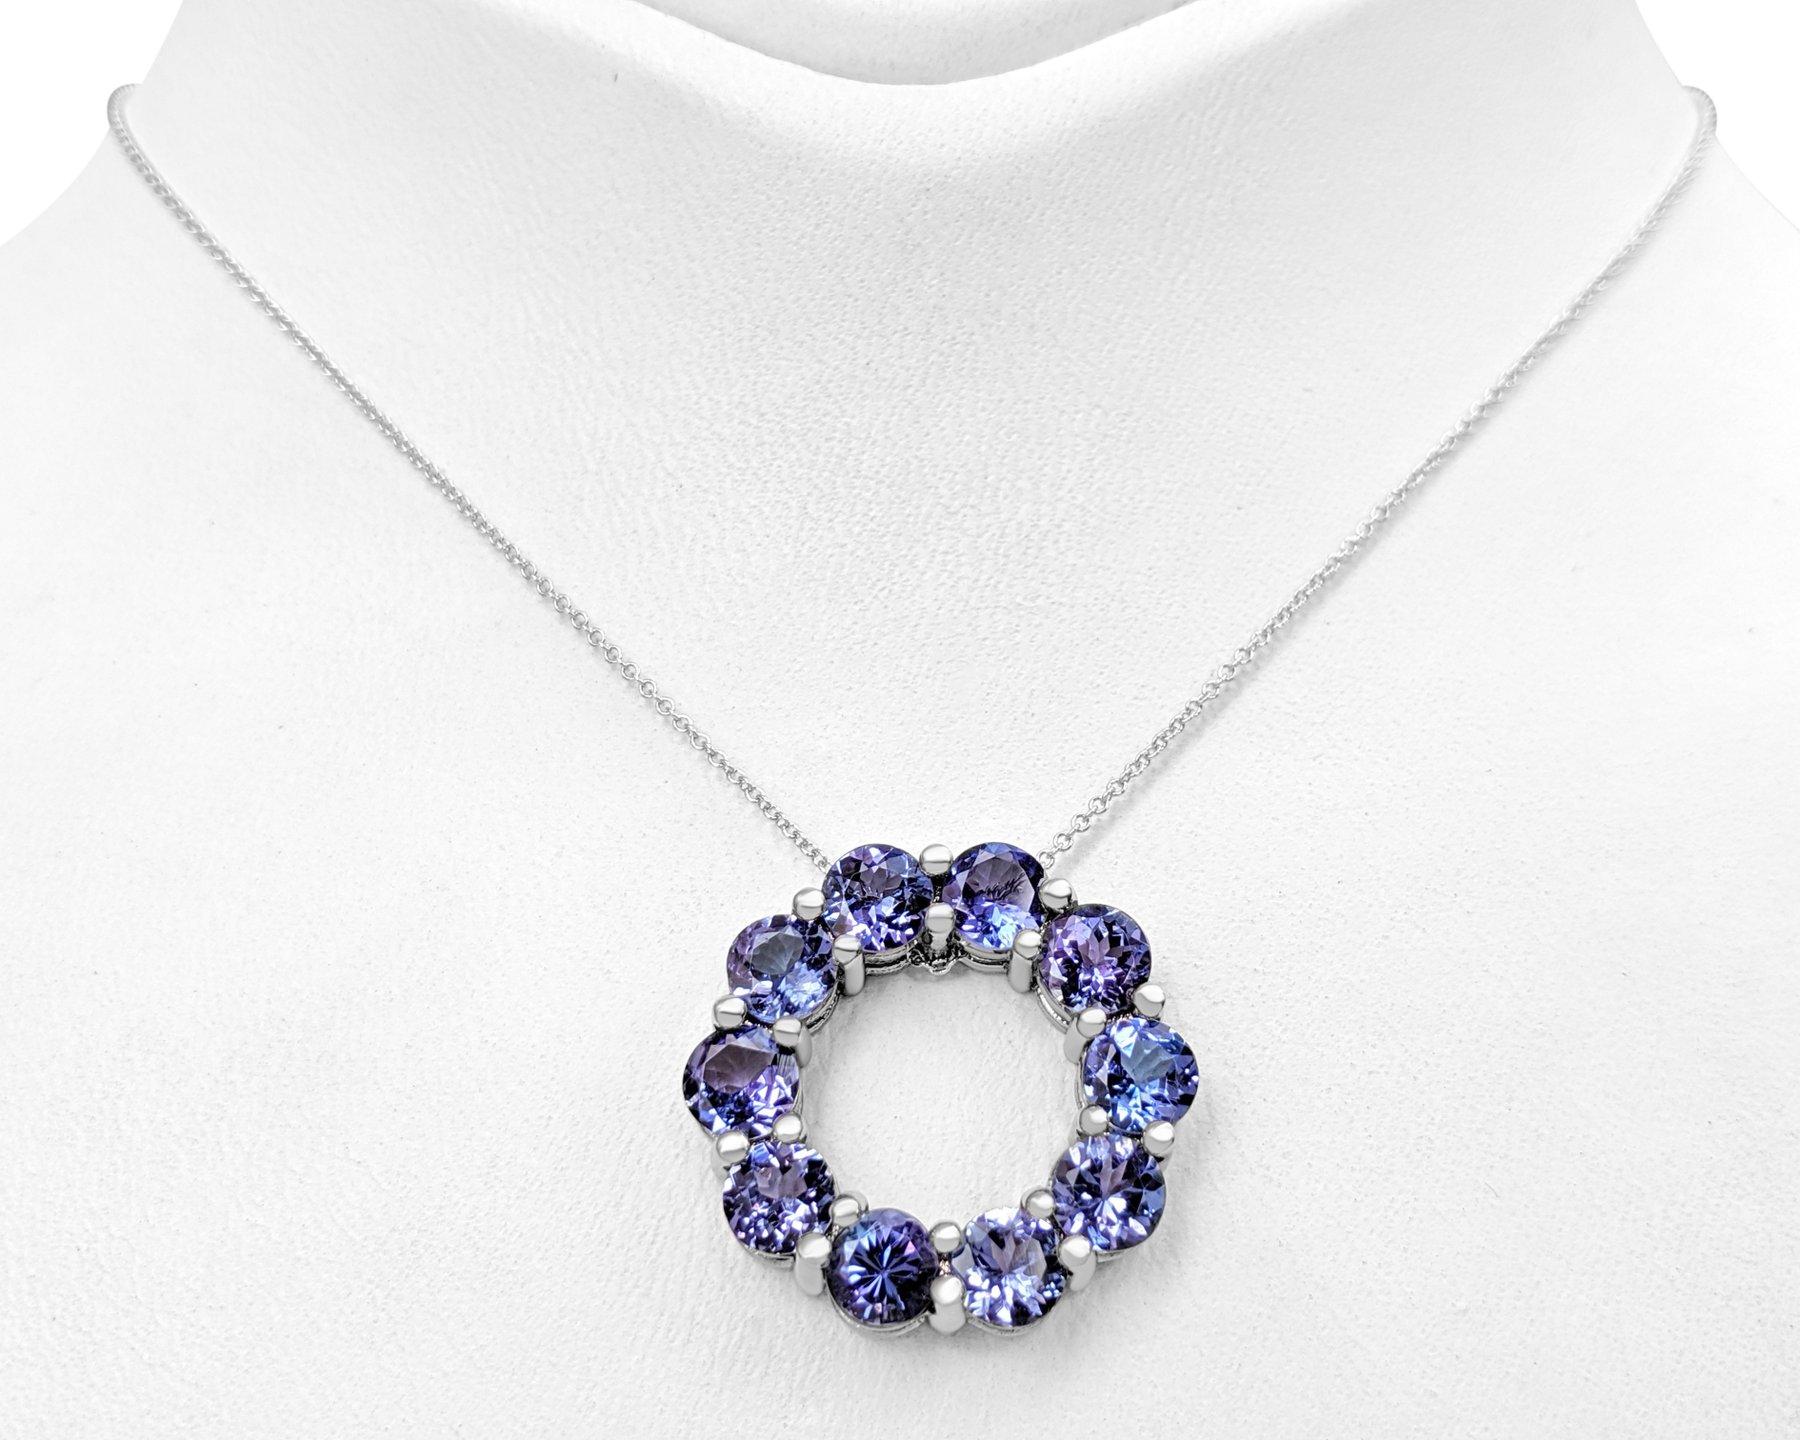 Art Deco $1 NO RESERVE!   5.23cttw Tanzanite, 14K White Gold Necklace With Pendant For Sale